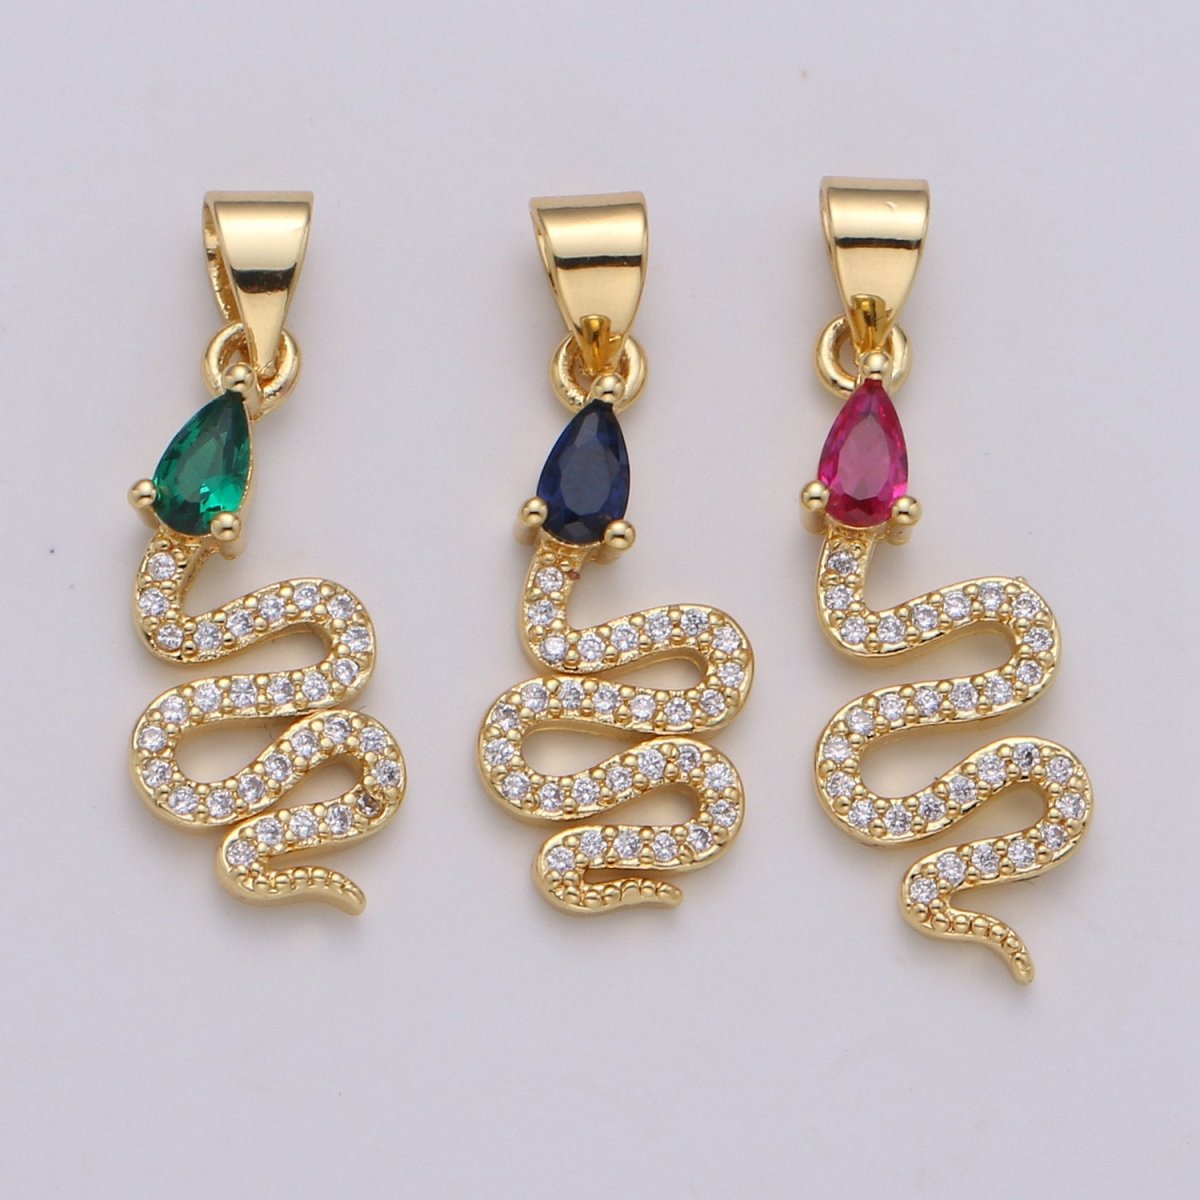 24k Gold Filled Snake Charm, Gold Snake Pendant Charm, Micro Pave Serpent Animal Cz Charm Green Blue Pink Stone DIY Jewelry I-804~I-806 - DLUXCA